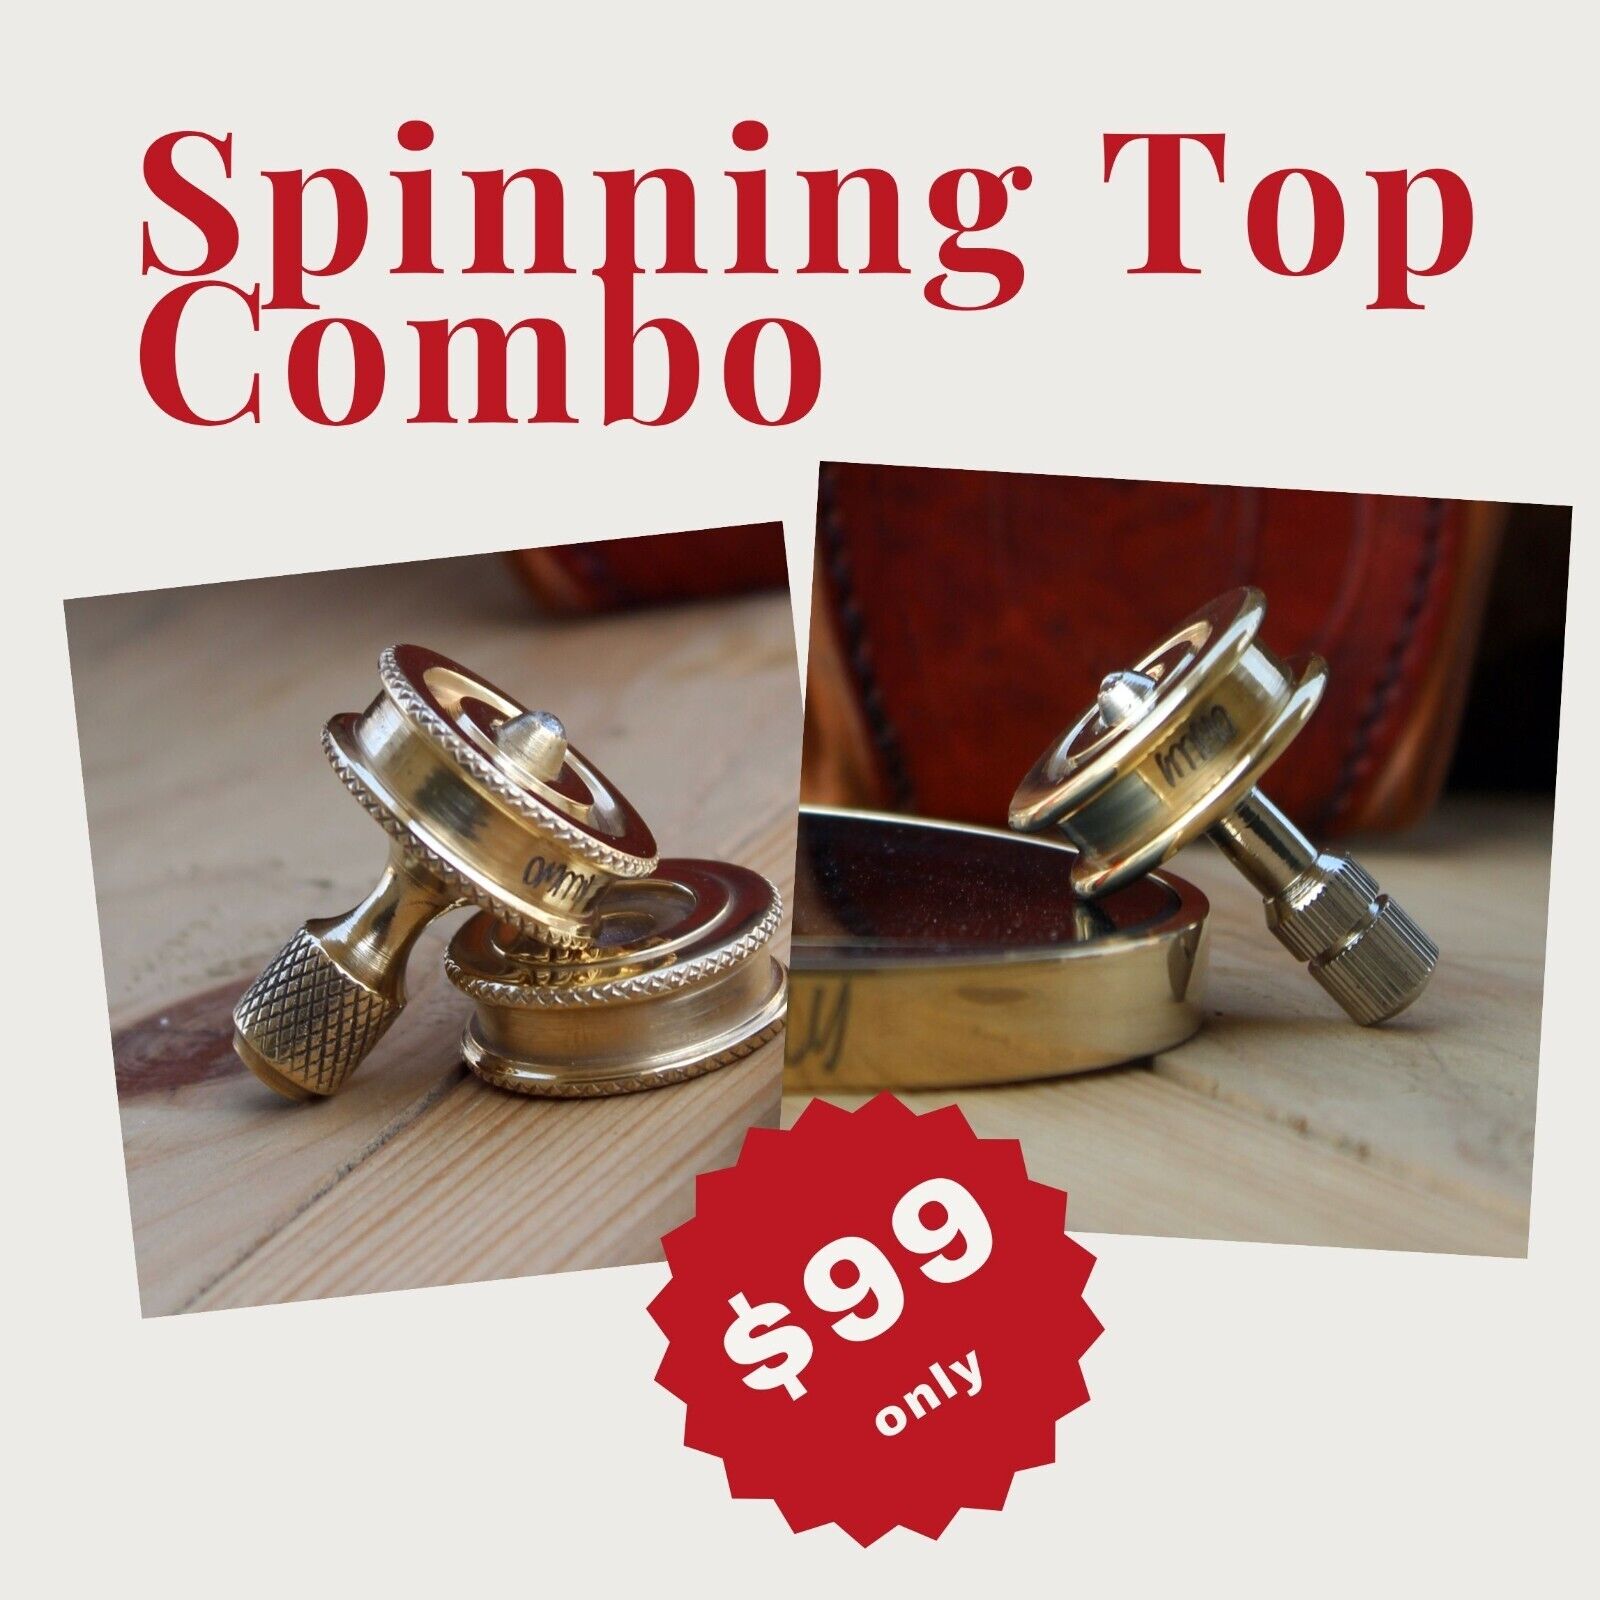 Spinning Top Duo Offer 99 Titanium EDC gear inception top movie gift ideas metal